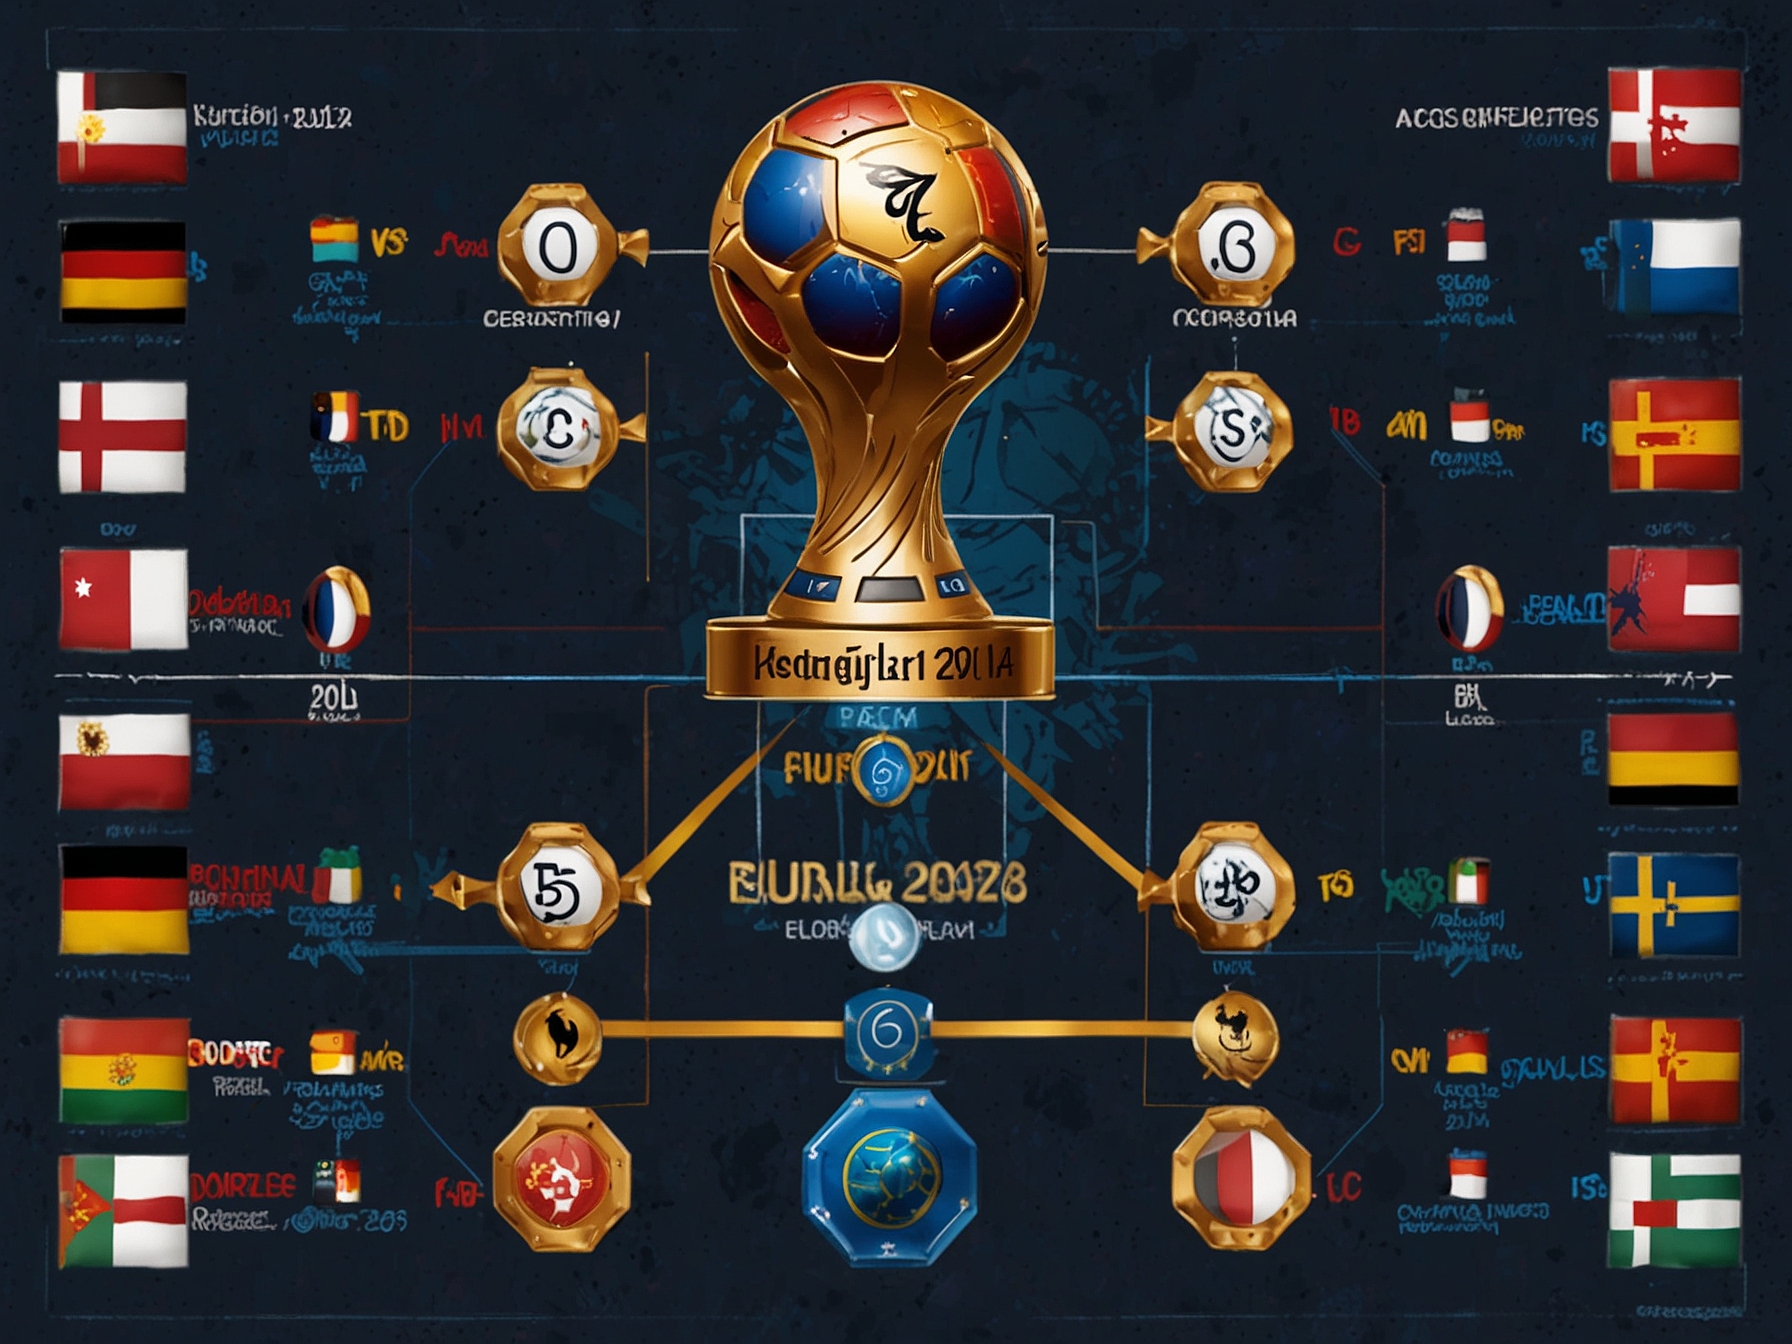 Graphic showing the bracket of Euro 2024, highlighting the easier knockout path for Group C winners and the tougher route for runners-up facing teams like Germany and Portugal.